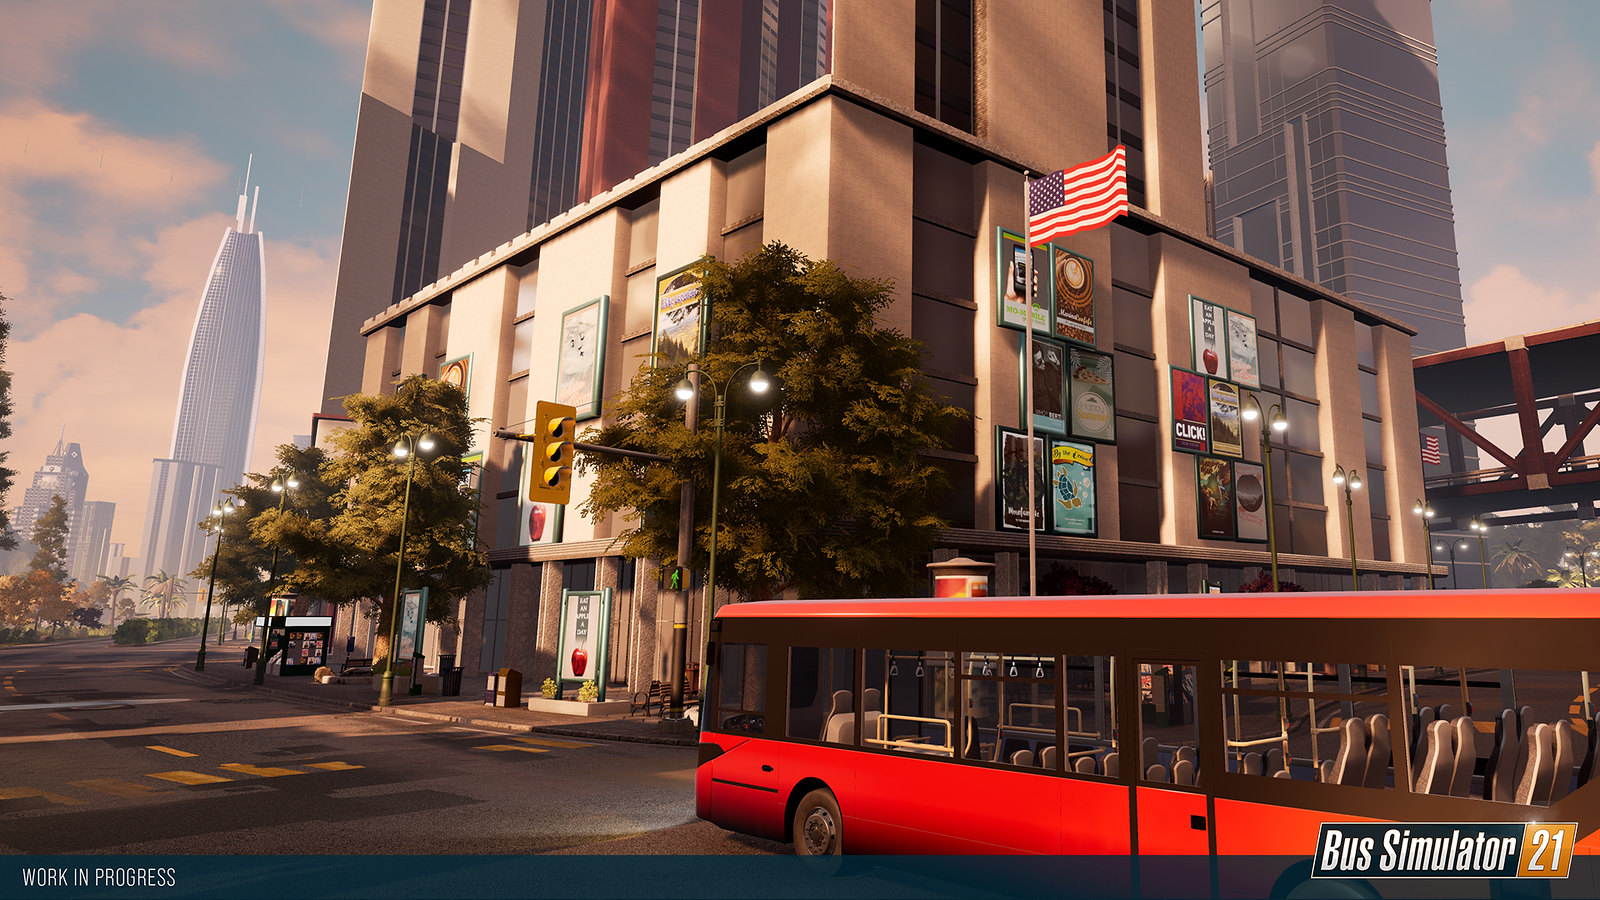 Bus Simulator 21 is driving towards a 2021 release